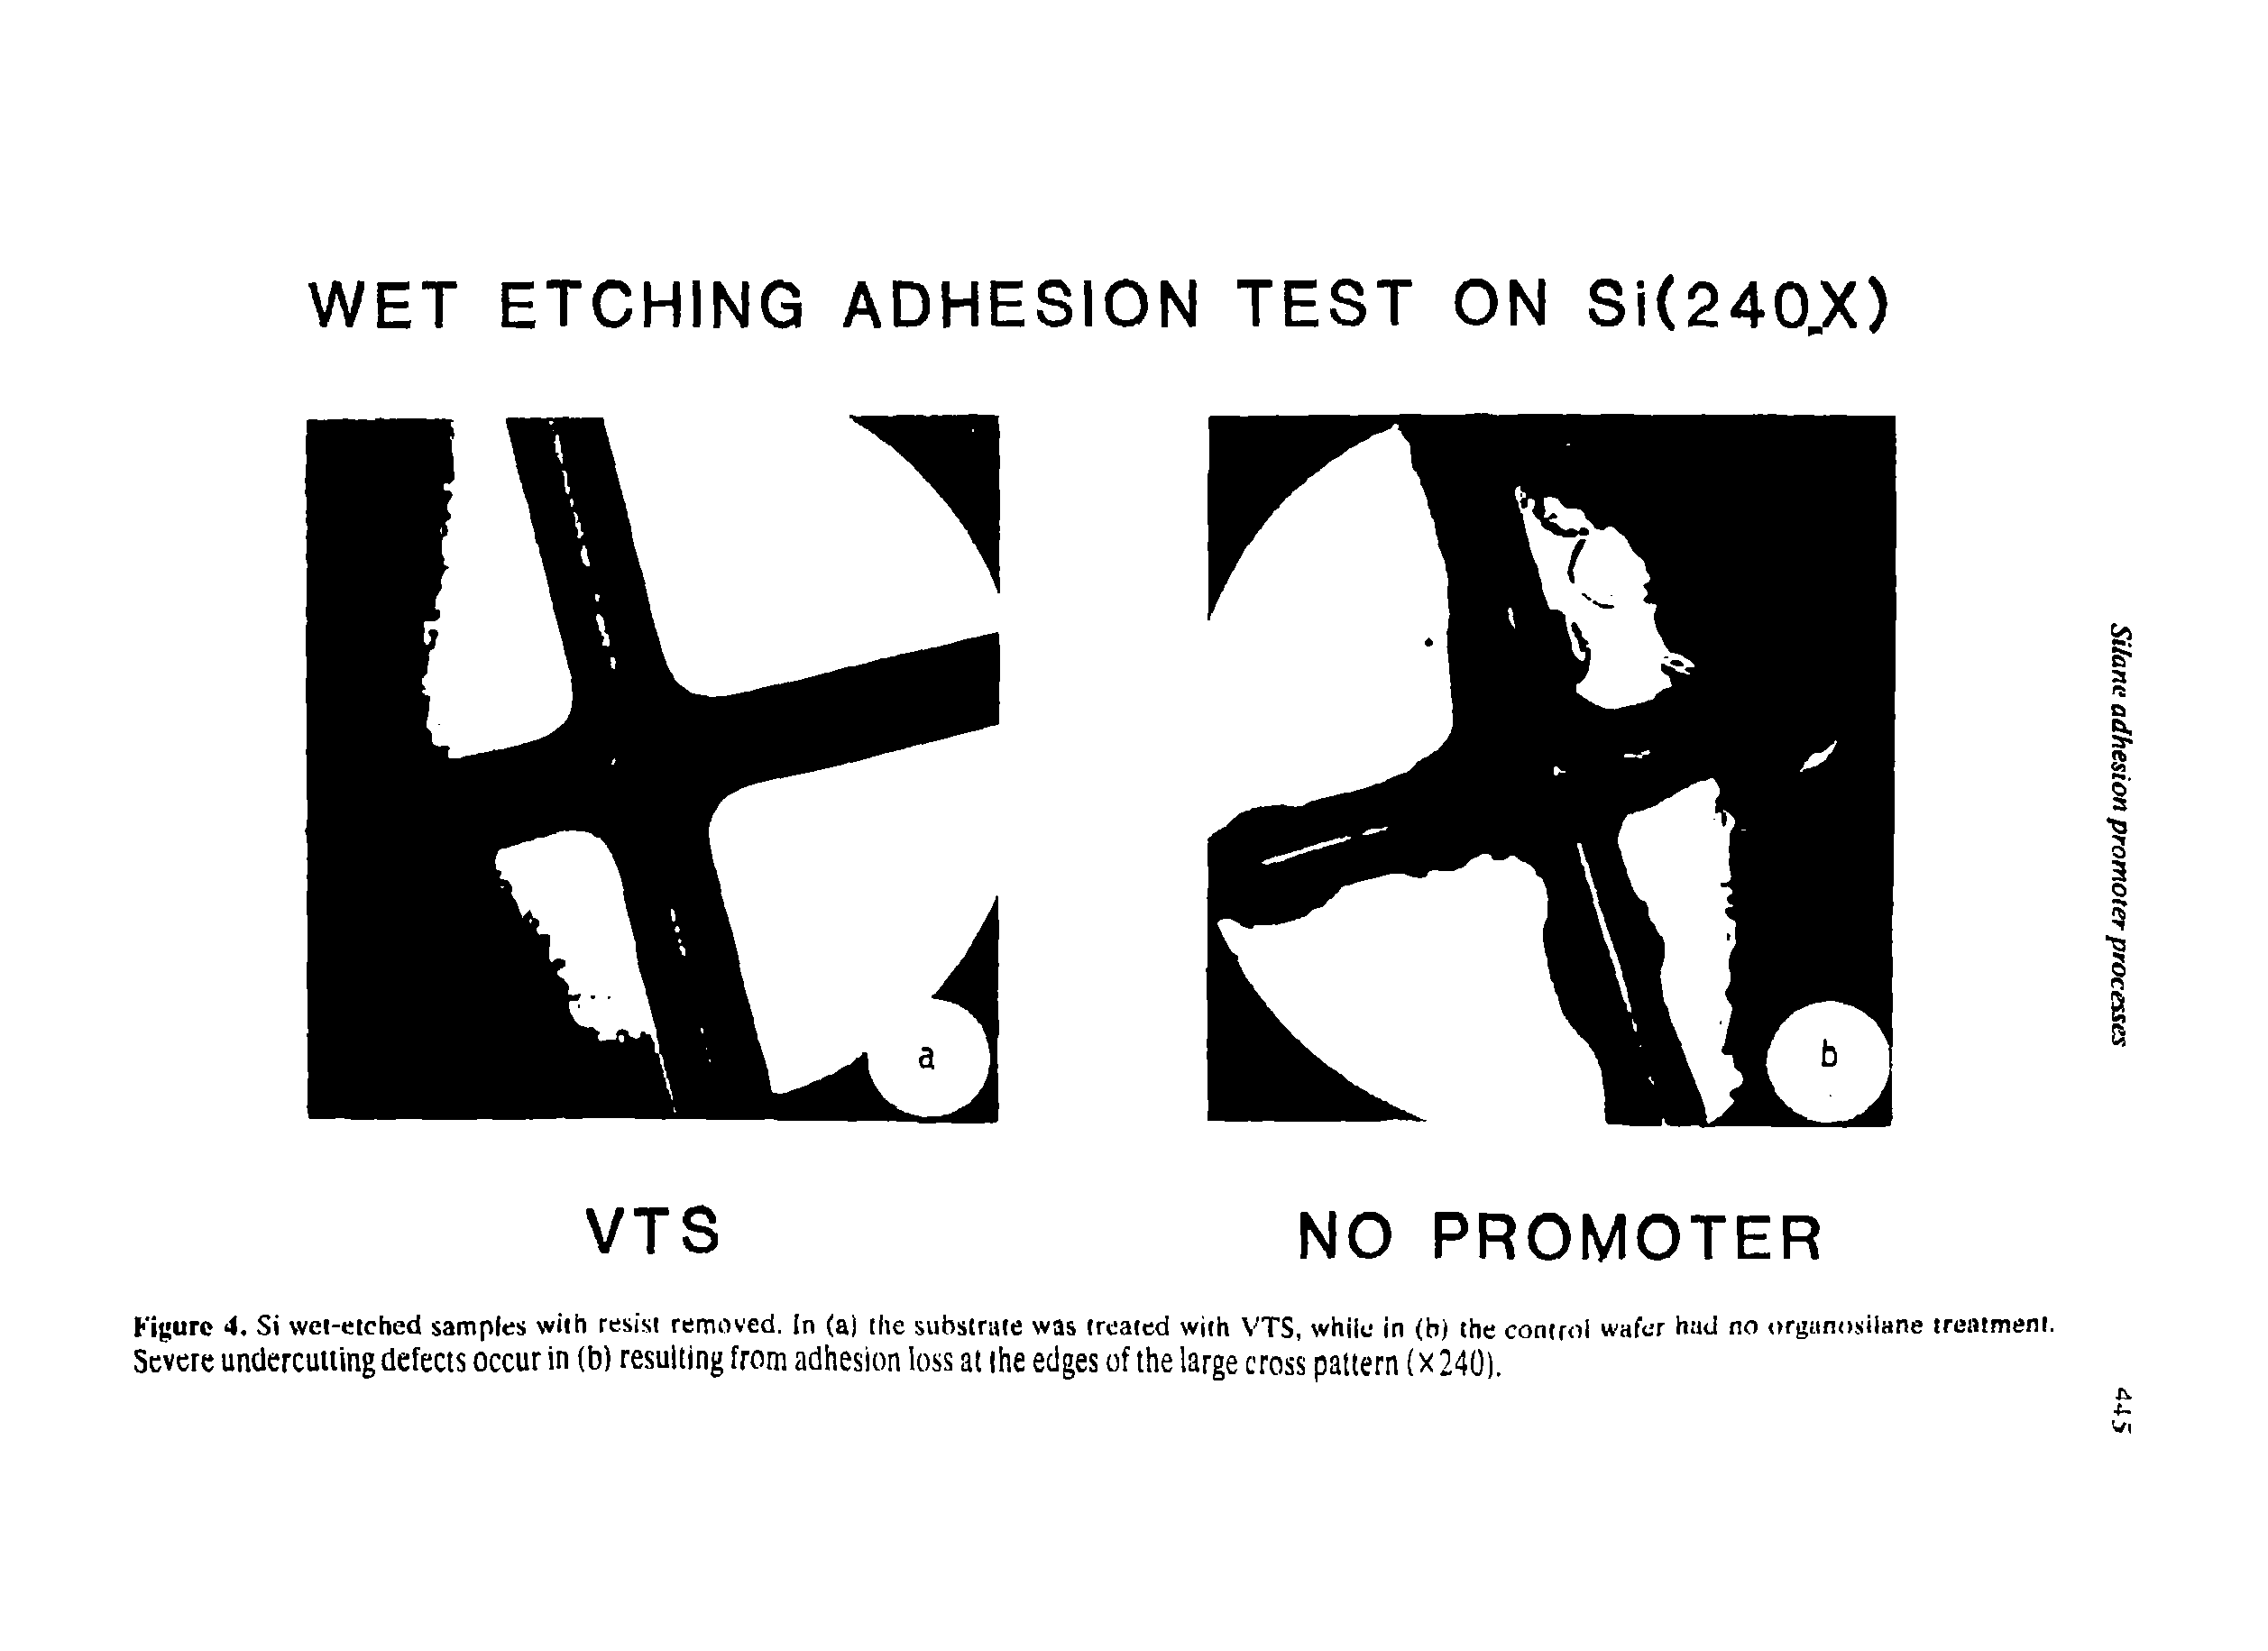 Figure 4. Si wei-etched samples with resist removed, in (al the substrate was treated with VTS, while in (b) the control wafer had no organosilane treatment.